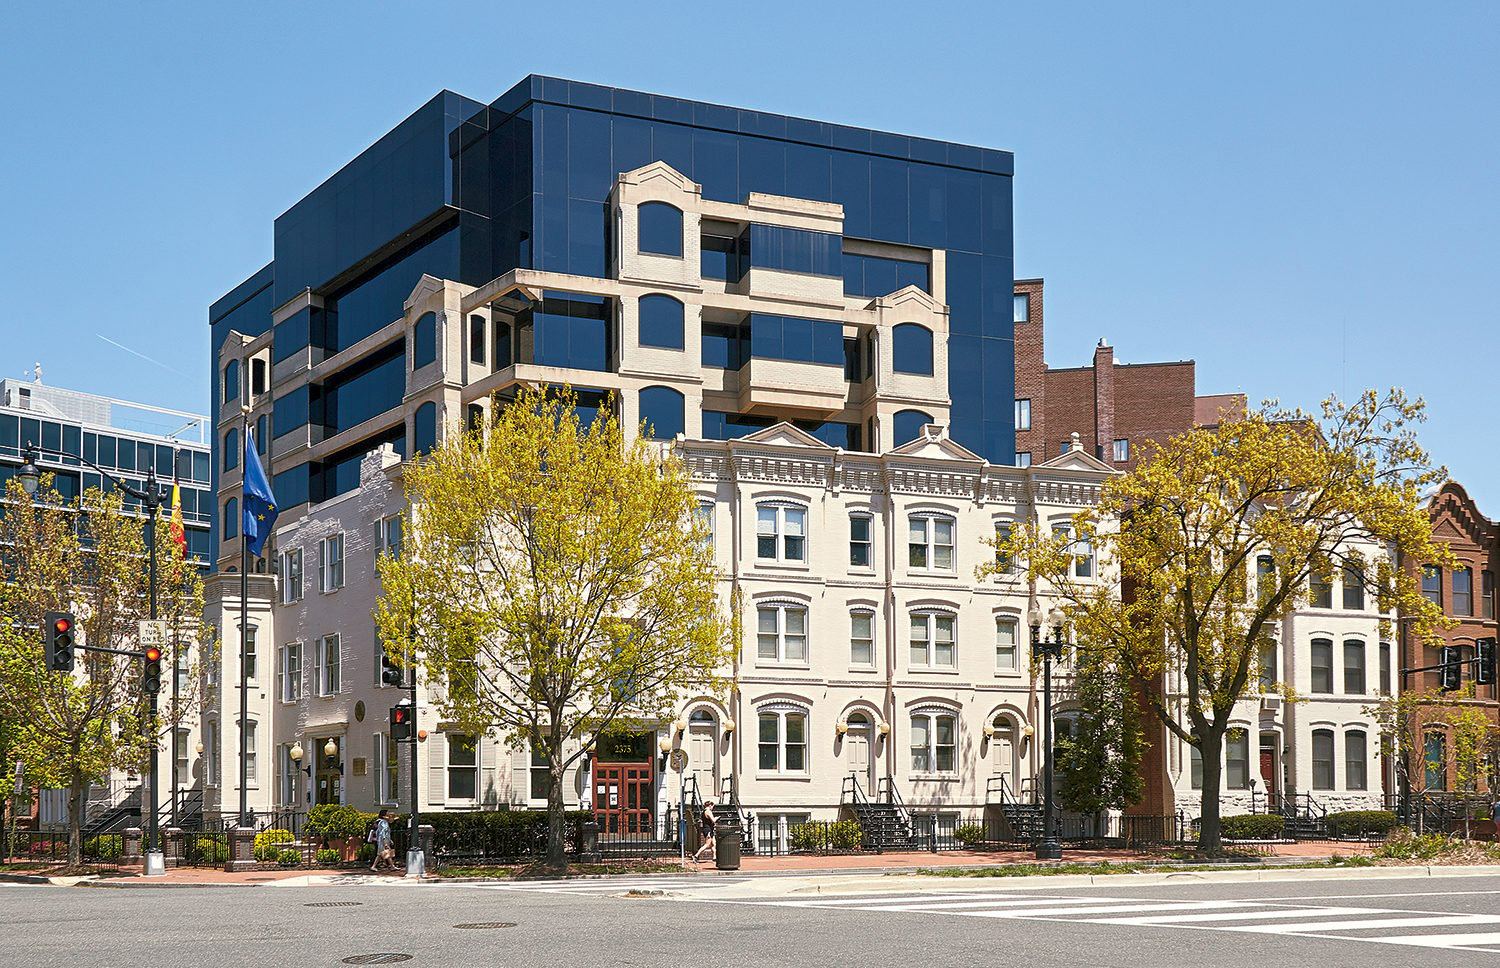 The Spanish Embassy’s stylistic jumble is a “facadism” misfire. Photograph by Jeff Elkins.